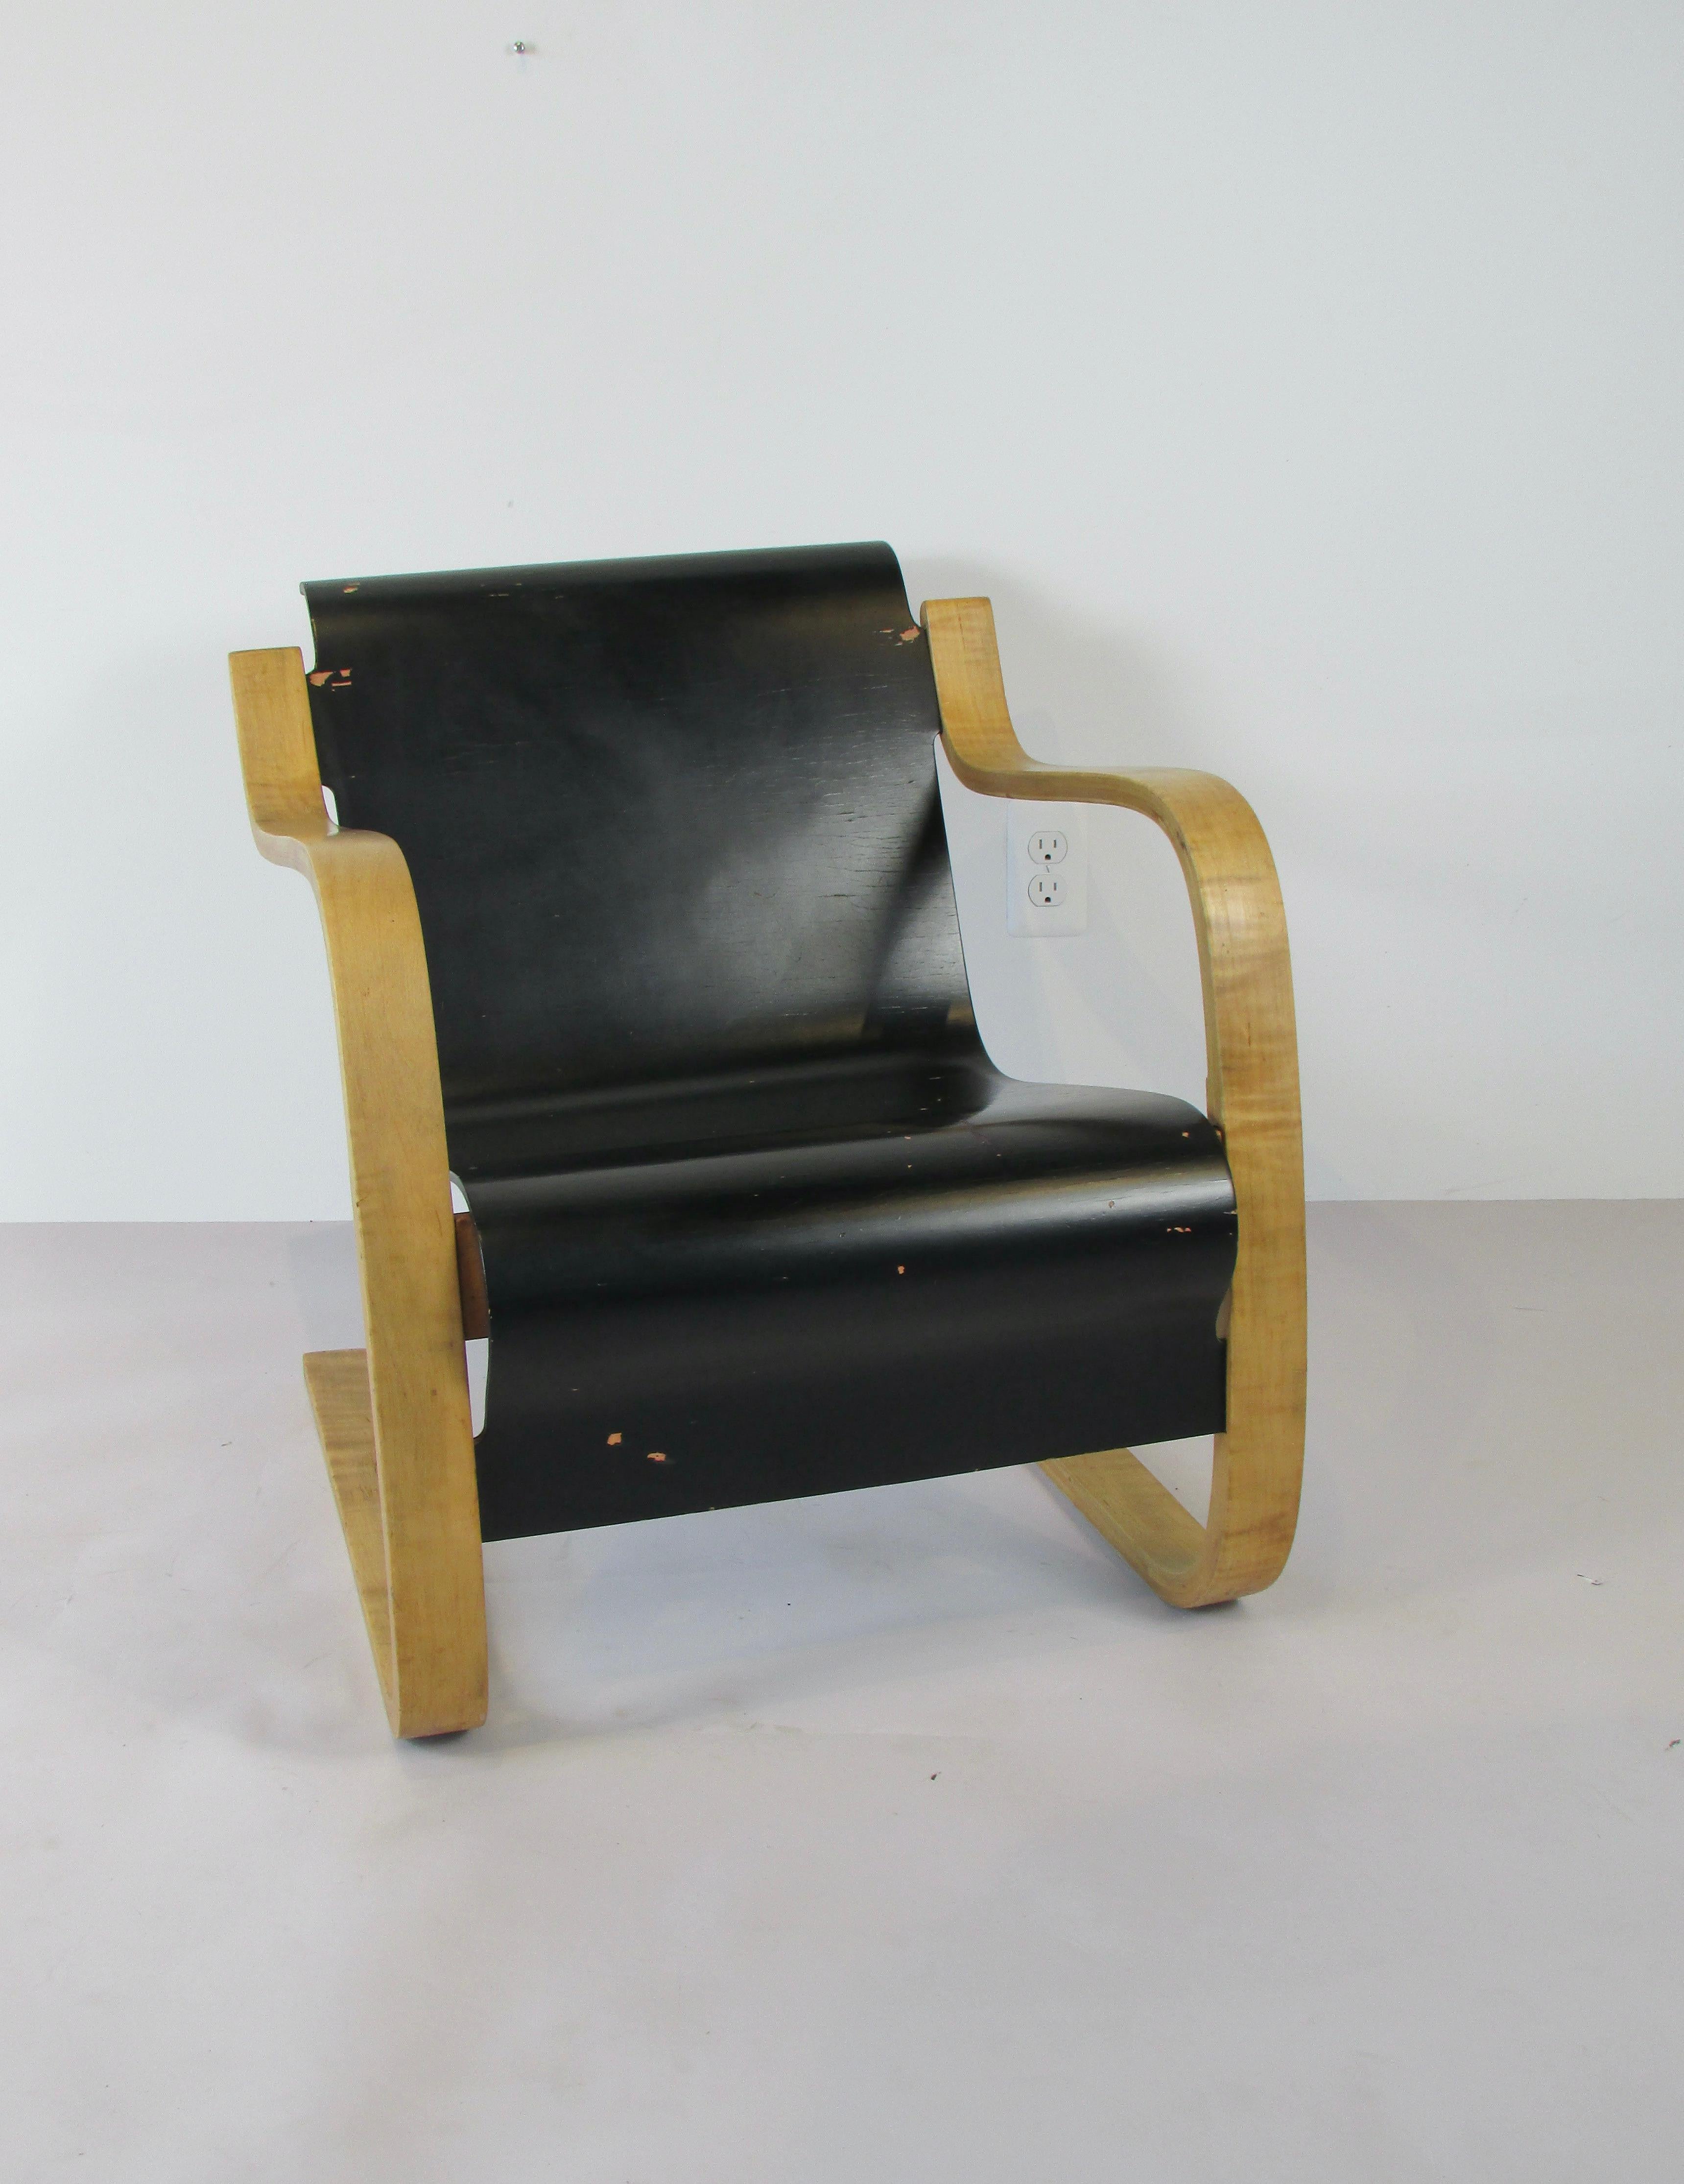 I believe this to be an early production chair in original somewhat worn finish. One of several designed by the Finnish architect Alvar Aalto during time he was building a tuberculosis sanitarium at Paimio, Finland. Cantilever design a principle